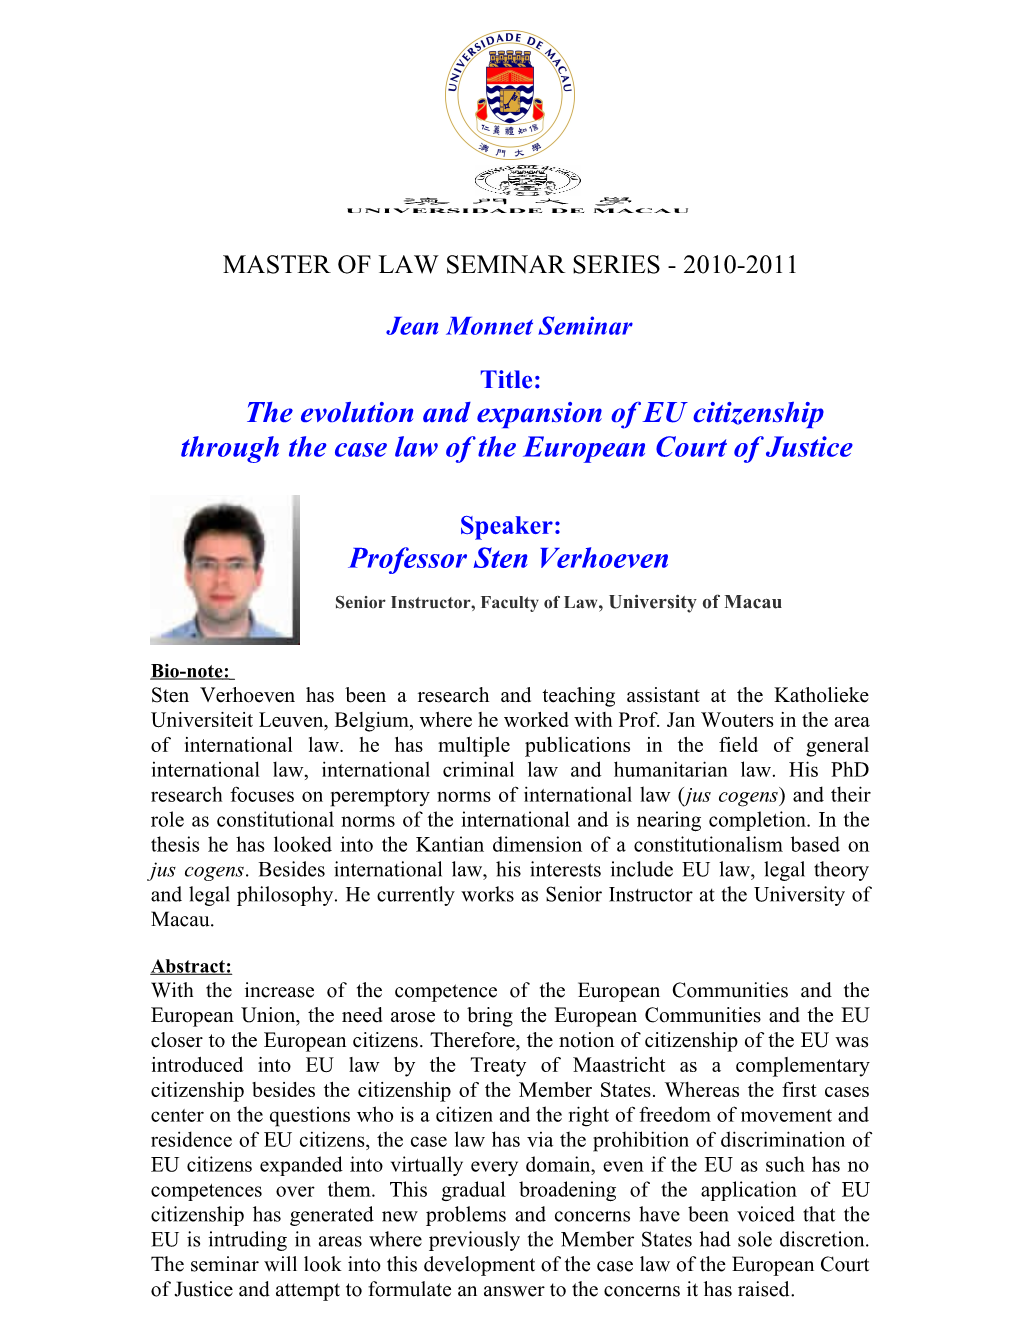 Through the Case Law of the European Court of Justice